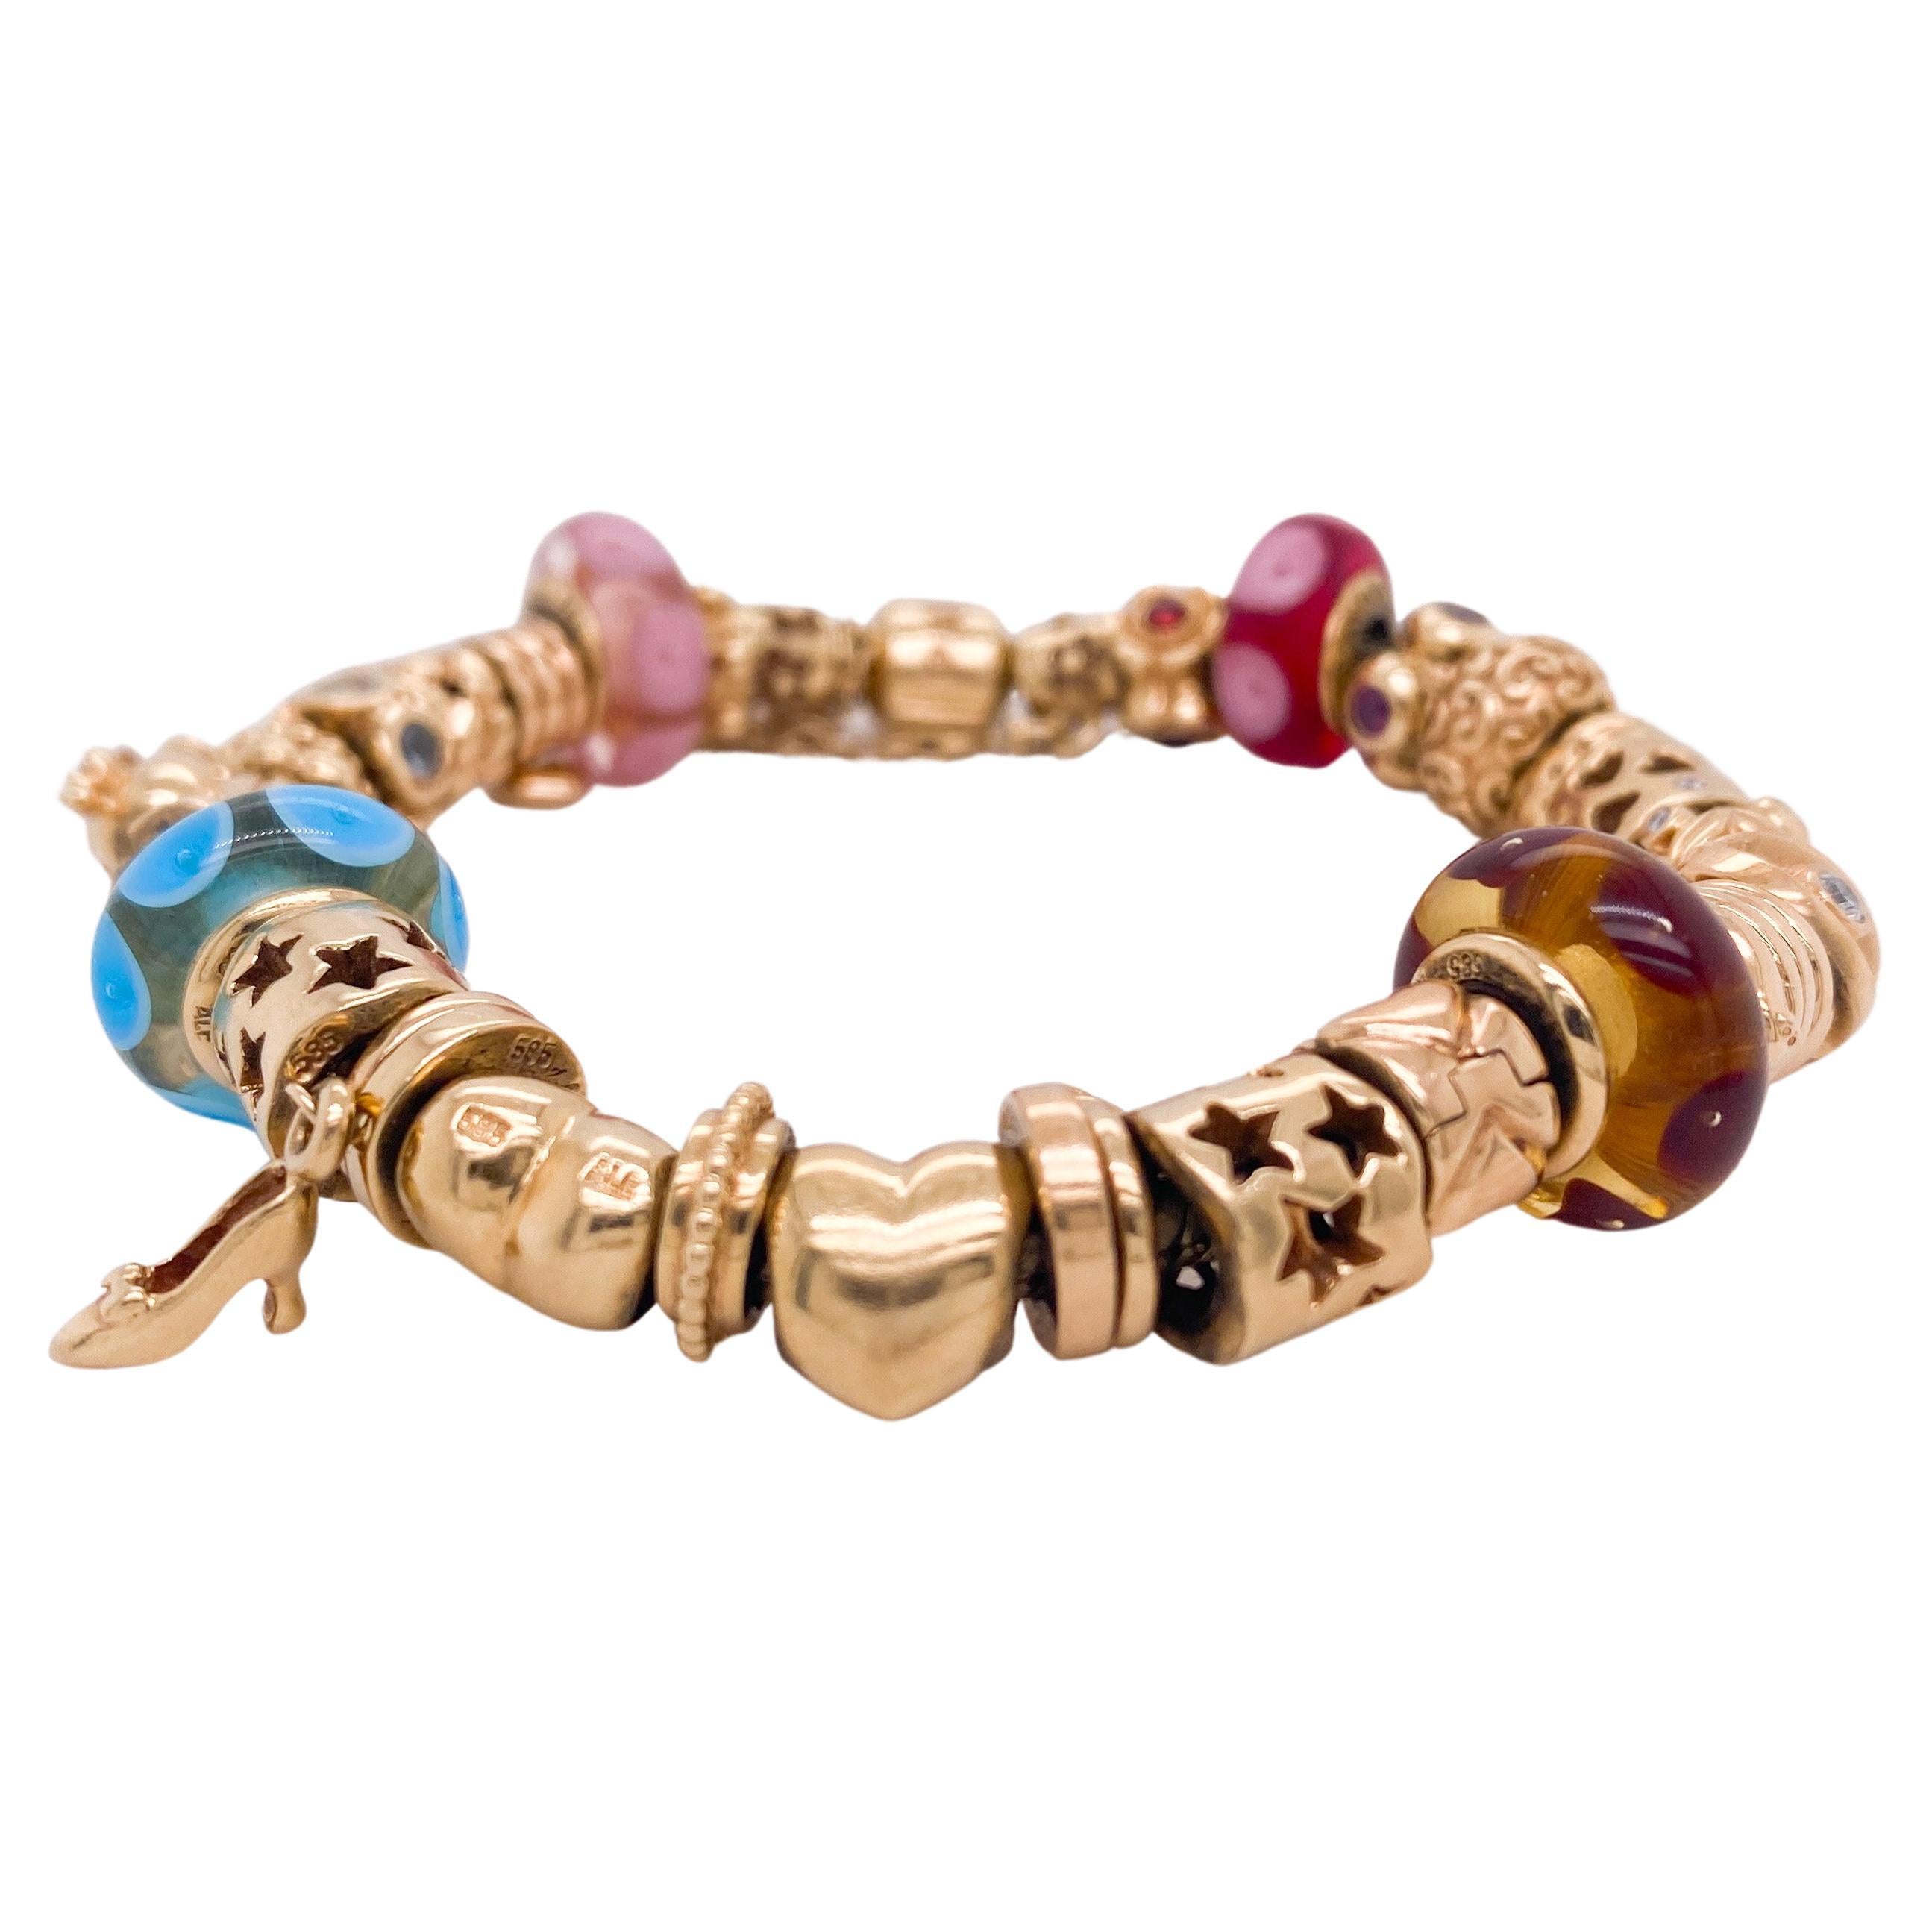 This original Pandora bracelet is solid 14 karat yellow gold and has the most interesting and unique designs that they make. There are 33 slide charms that have different textures and designs and every time you look at it you see a different